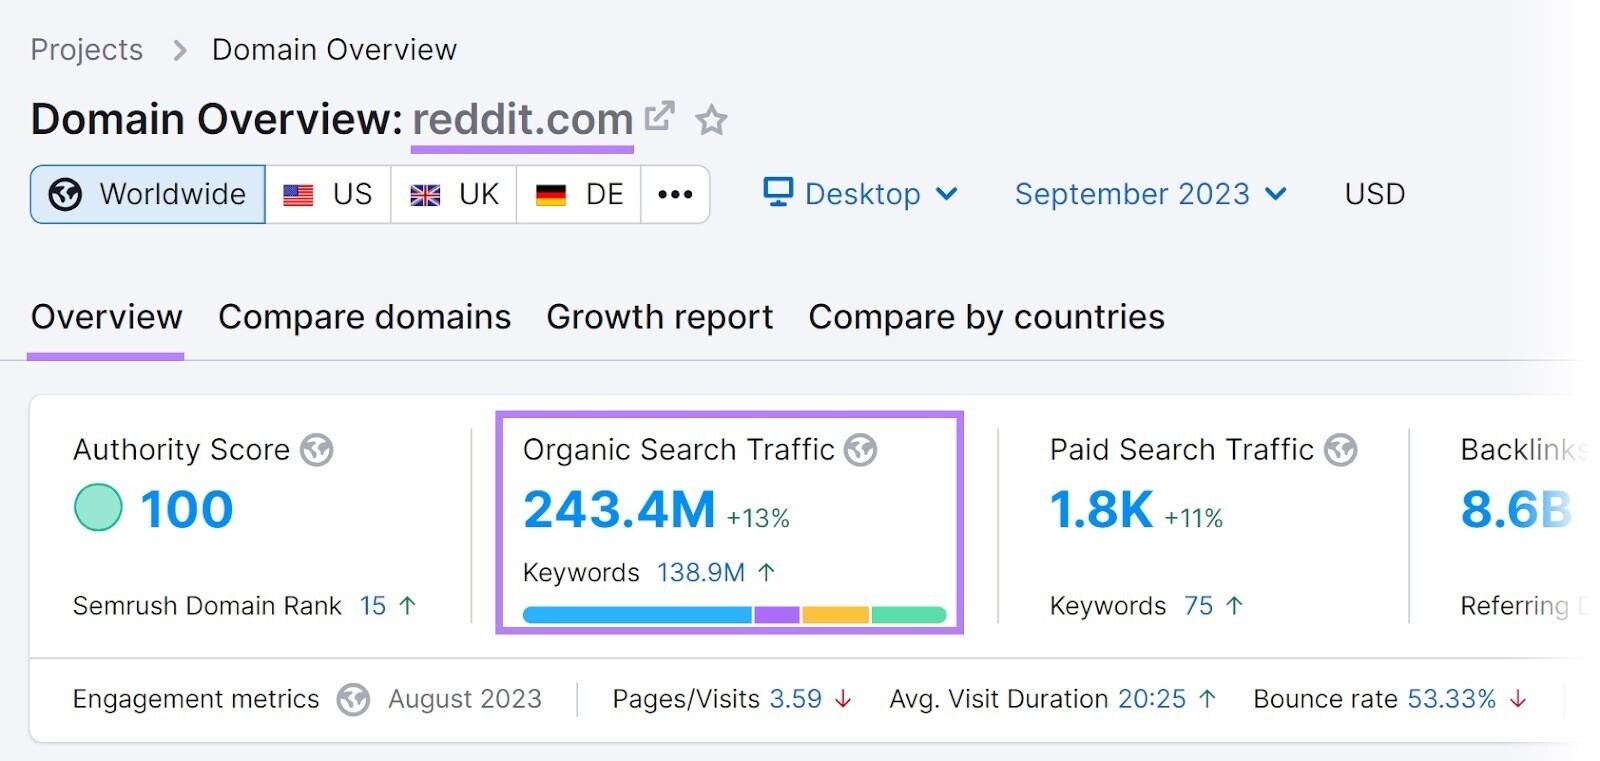 Domain Overview results for Reddit